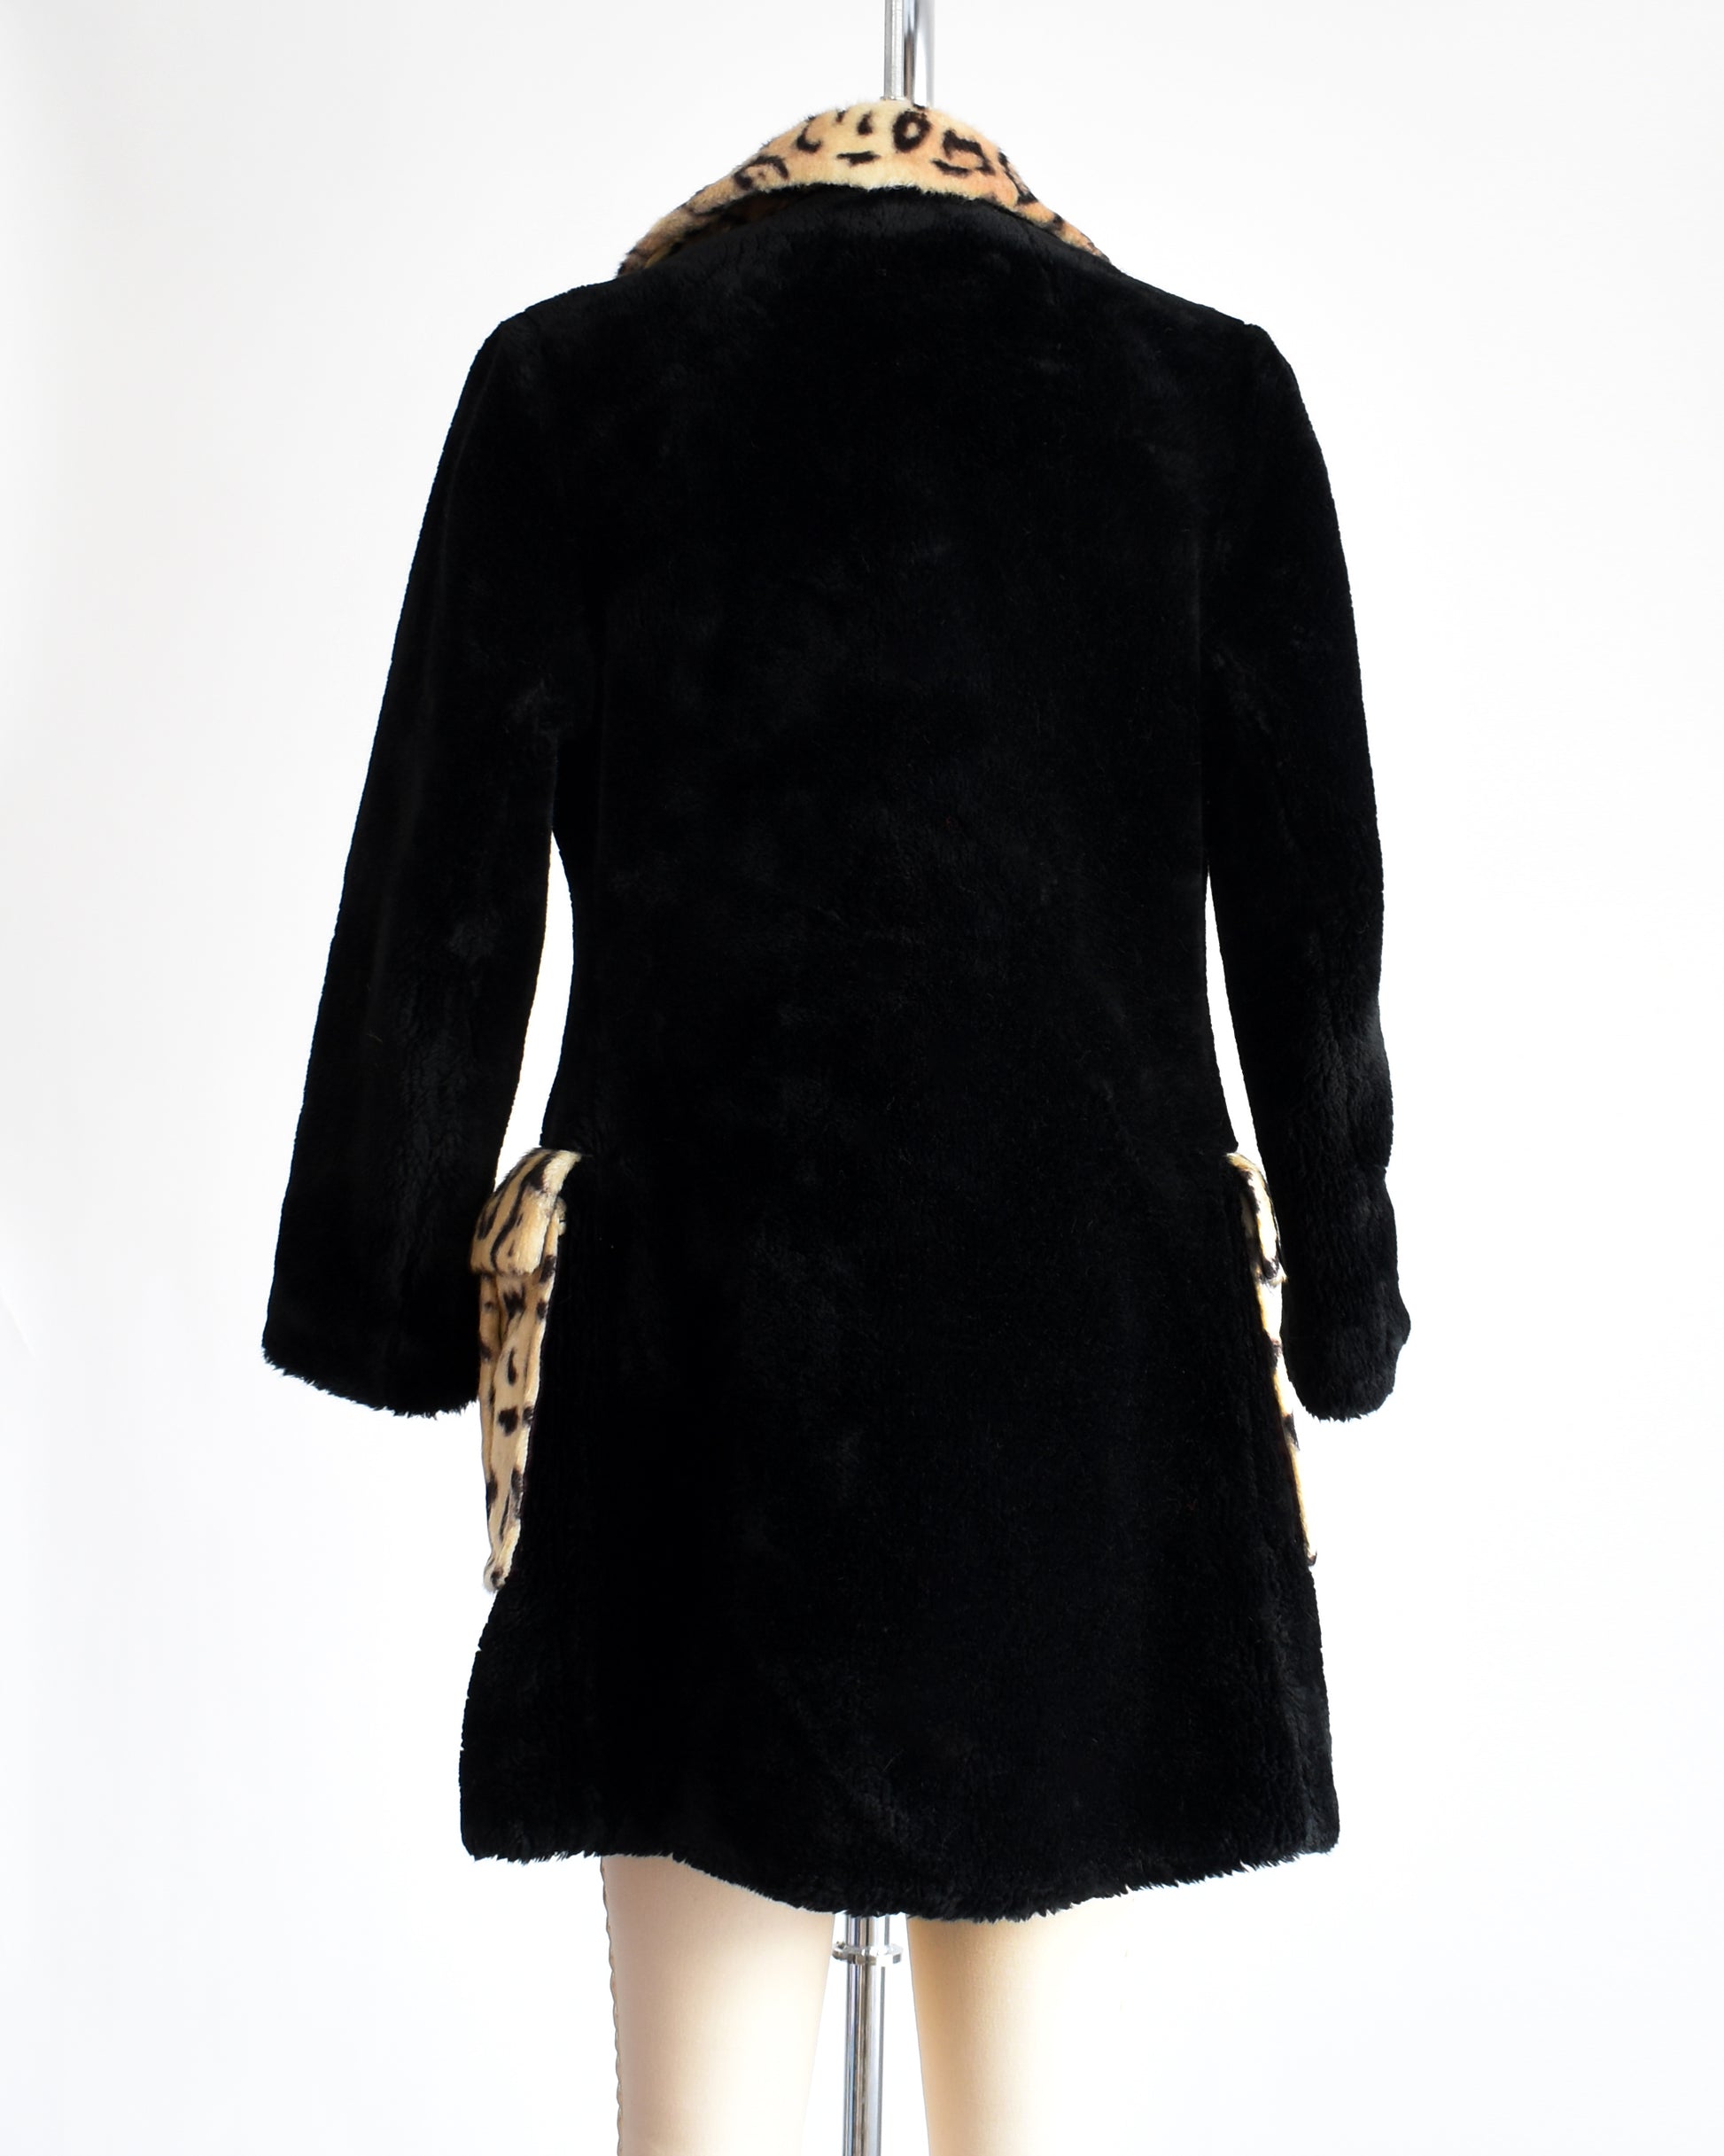 Back view of a vintage leopard print coat that is black on the back